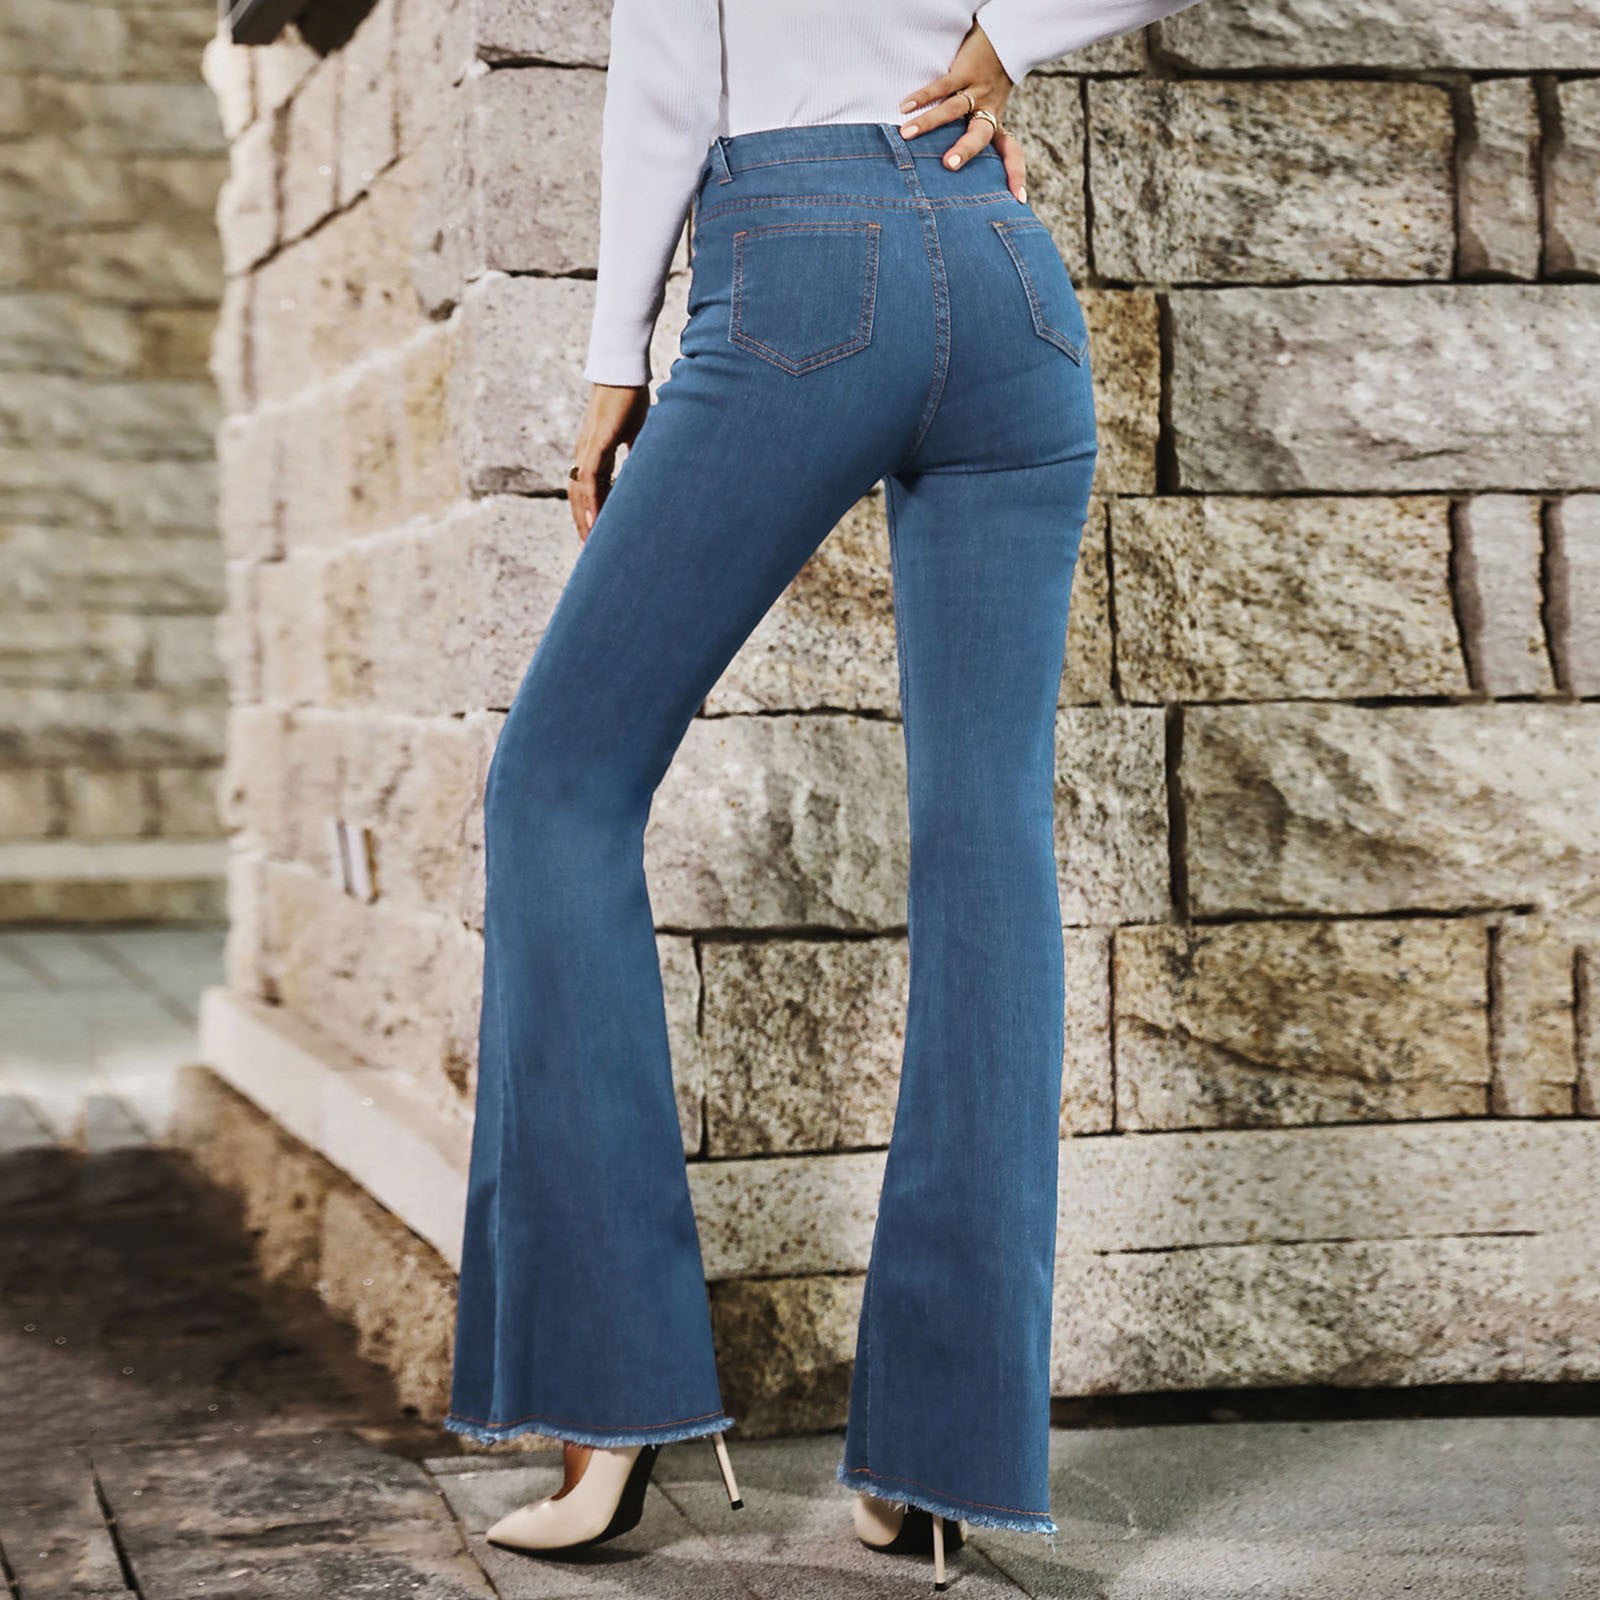 B91xZ Work Pants For Women High Waist Spring And Autumn New Wide Leg  Elastic Slim Stitching Denim Flared Jeans Jeans For Women BU3,Size M 